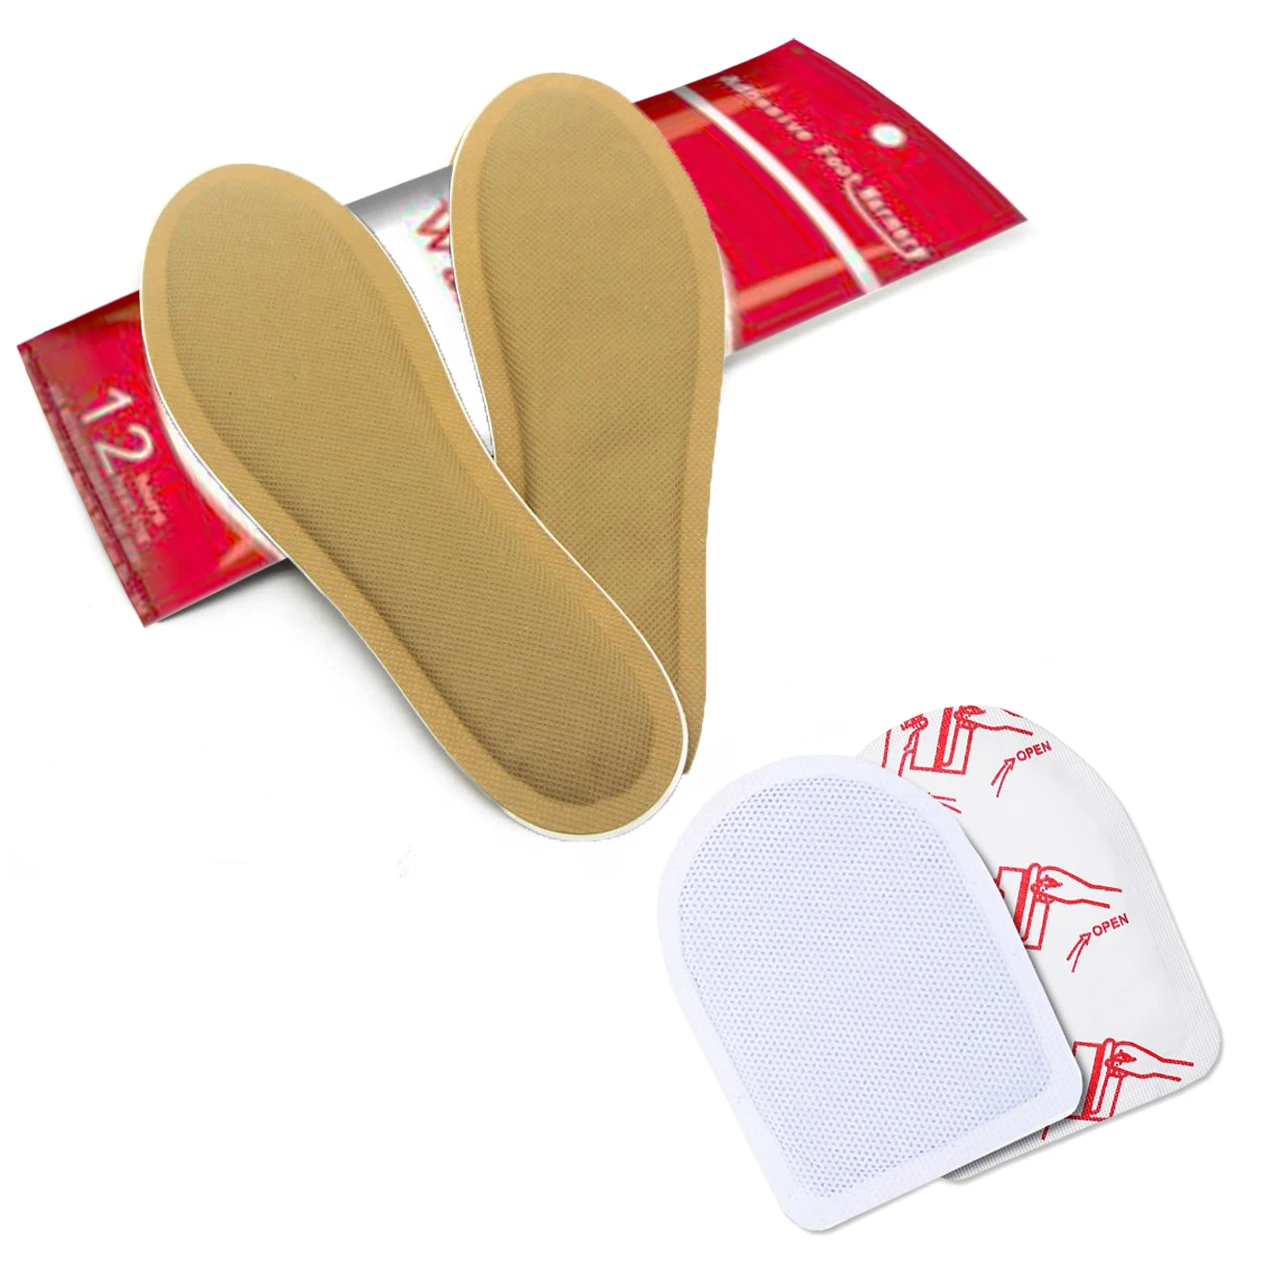 
Toe warmer heating insole heat patch high quality foot warm pad adhesive heat pad for foot 